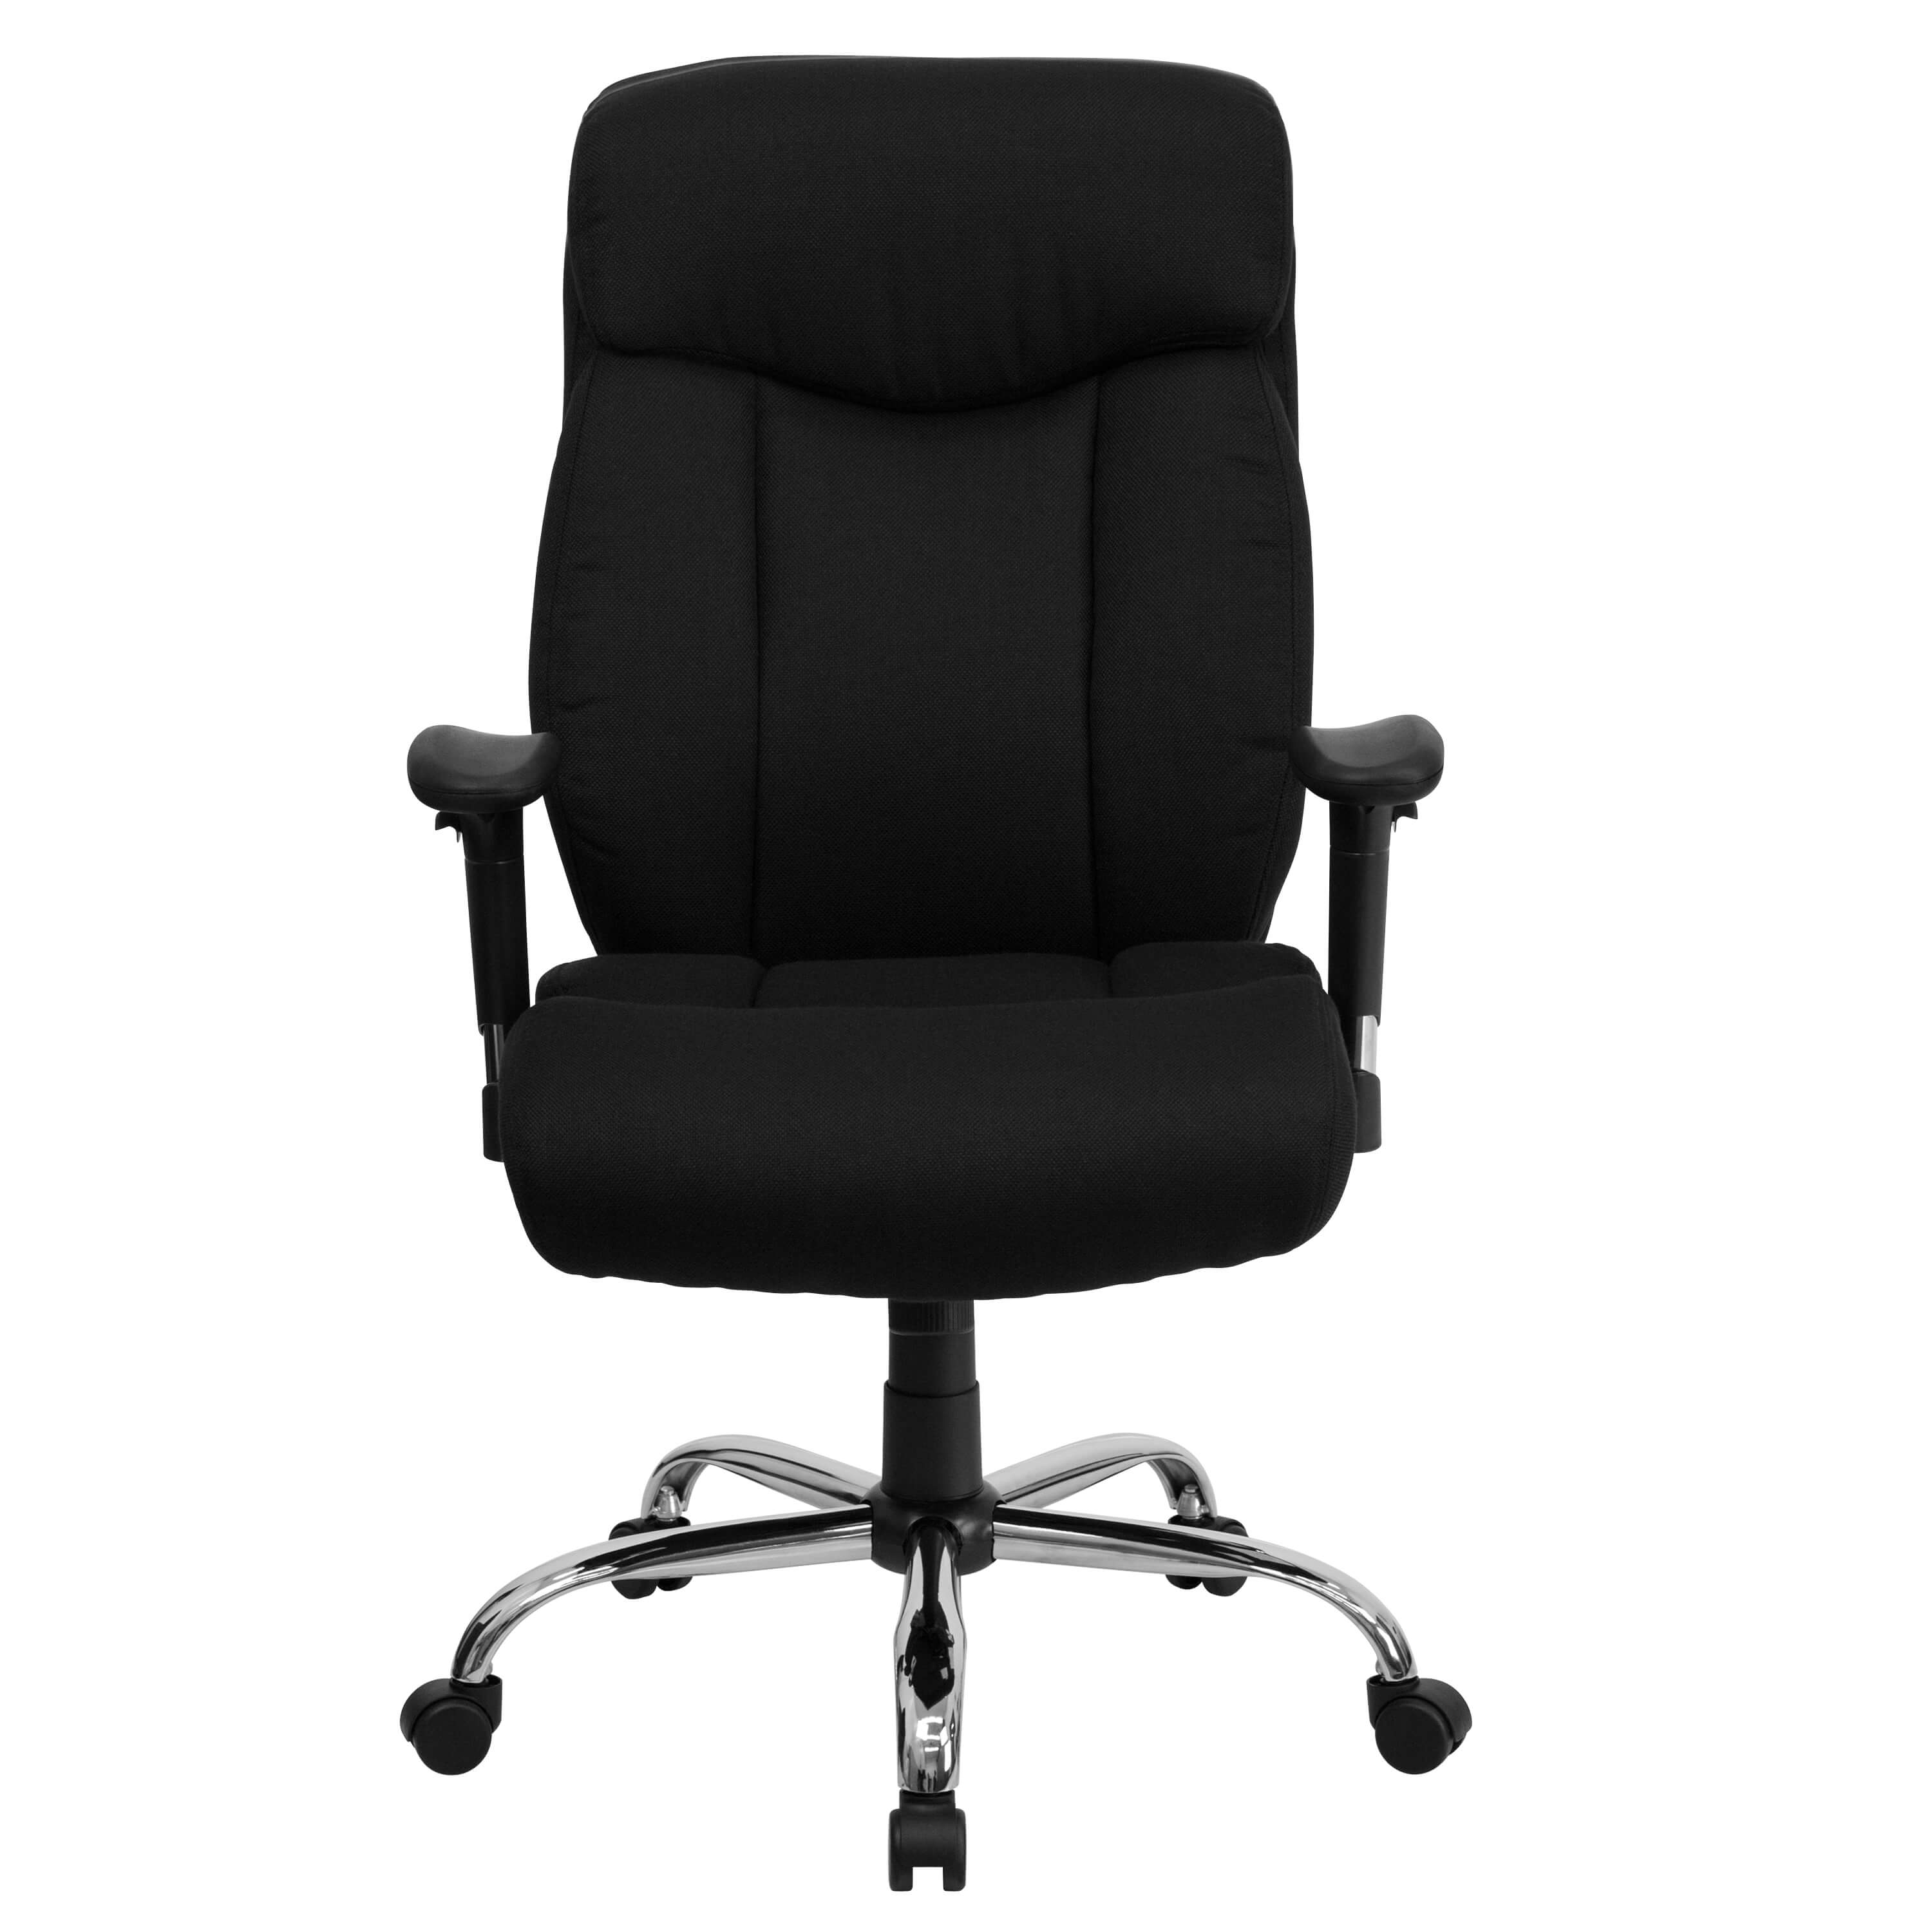 Heavy duty ergonomic office chairs front view